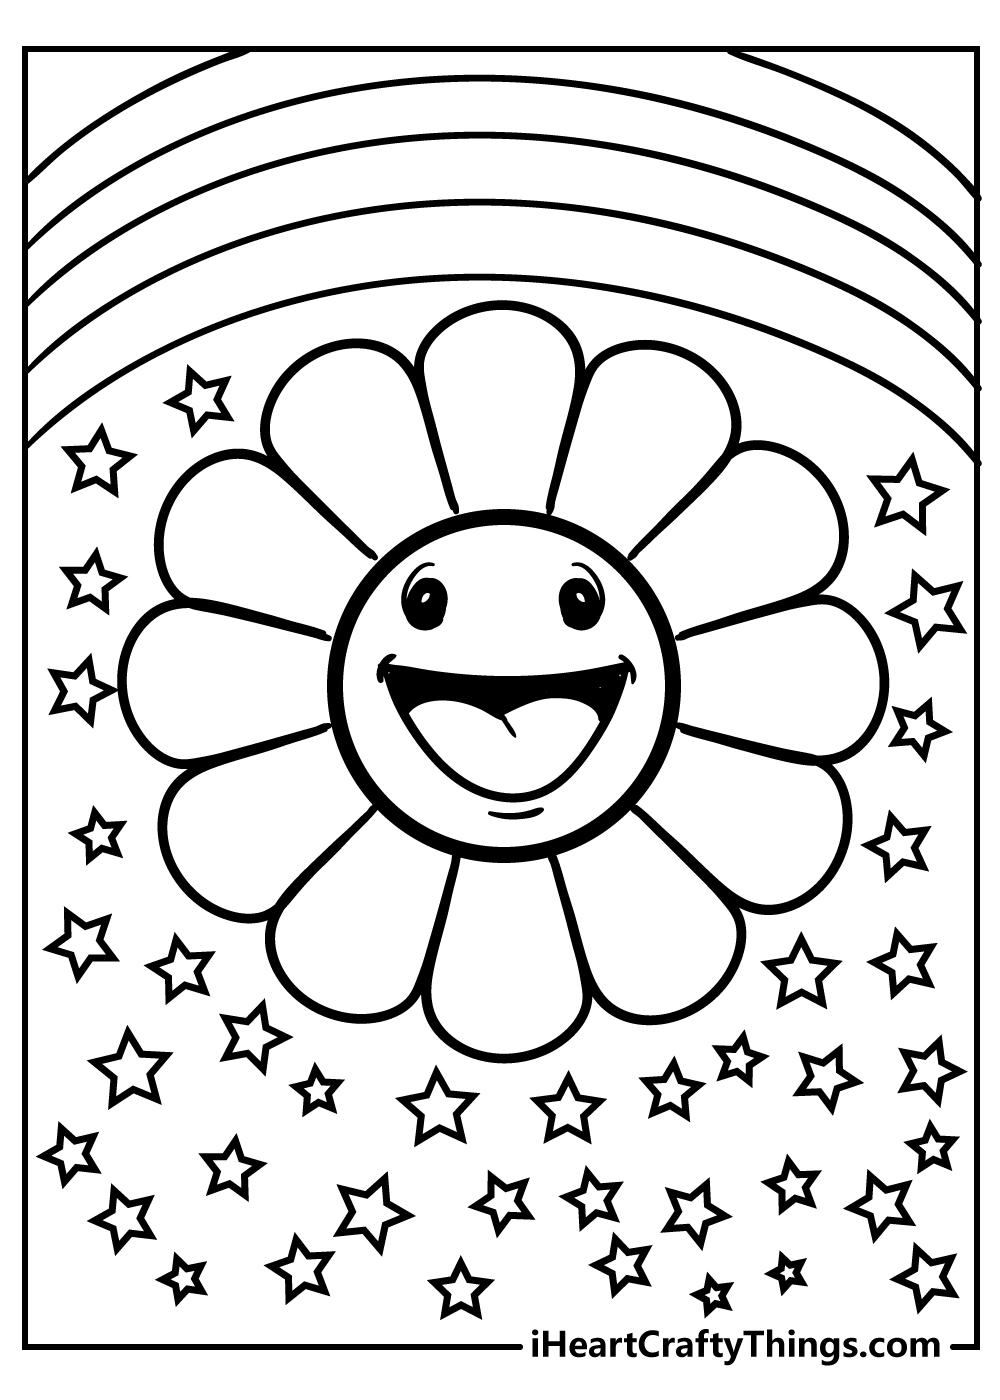 rainbow coloring sheet for children free download